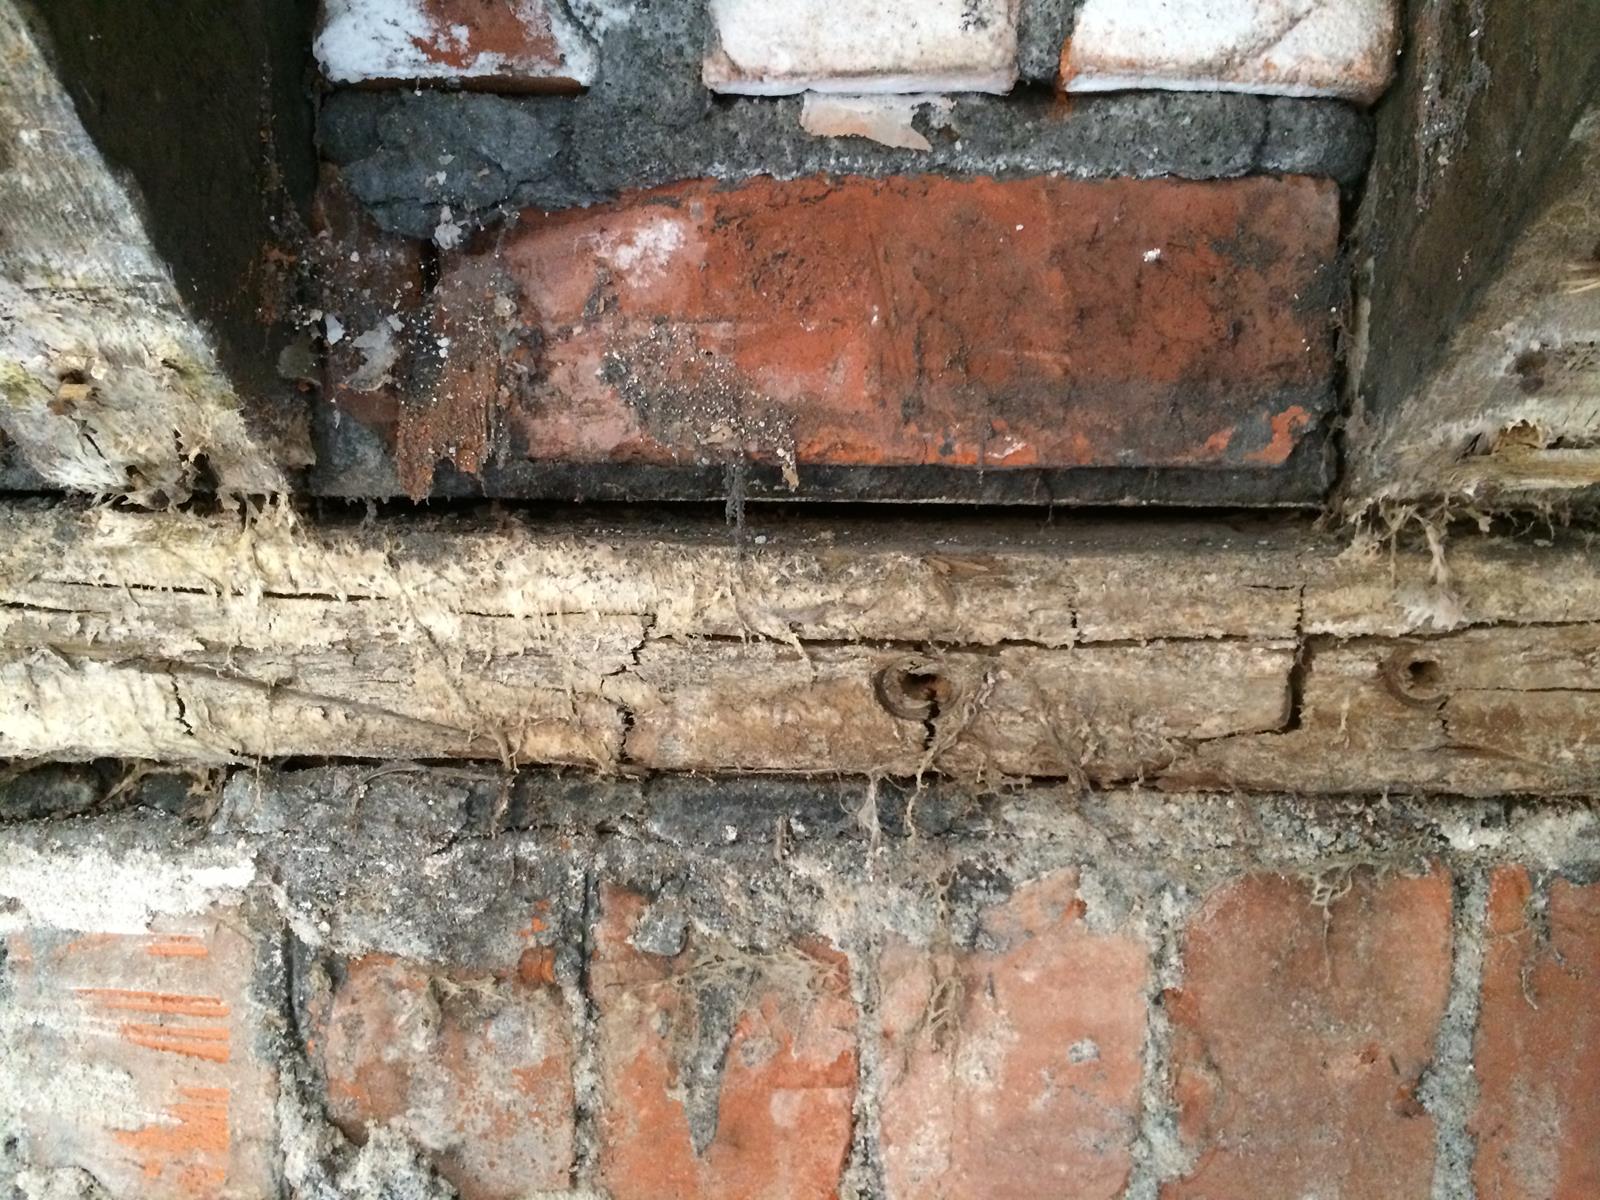 Dry Rot in a floor joist and wall plate.